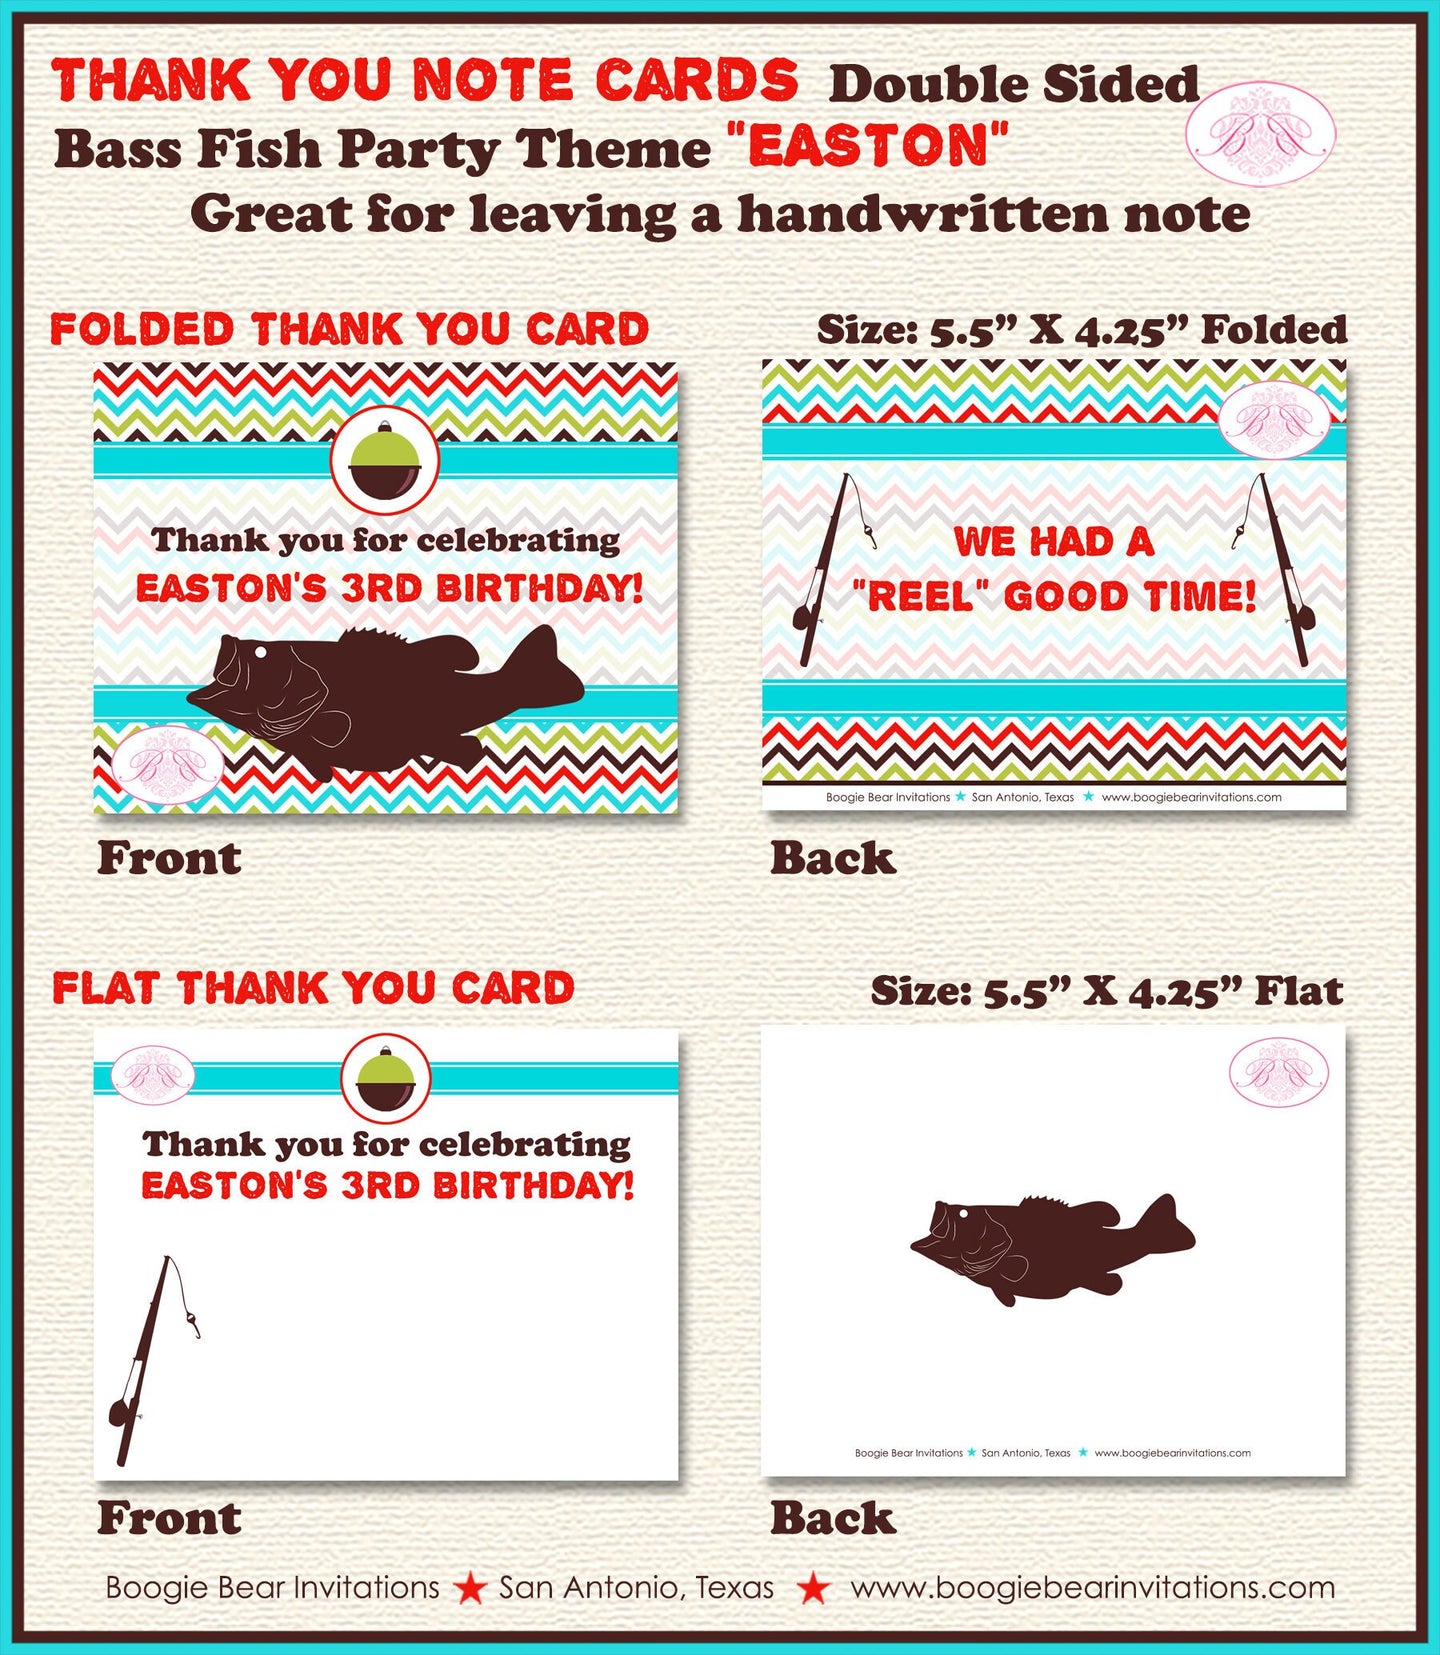 Bass Fish Fishing Birthday Thank You Card Party Red Green Blue Camping Rustic Rod Reel Boy Girl Boogie Bear Invitations Easton Theme Printed